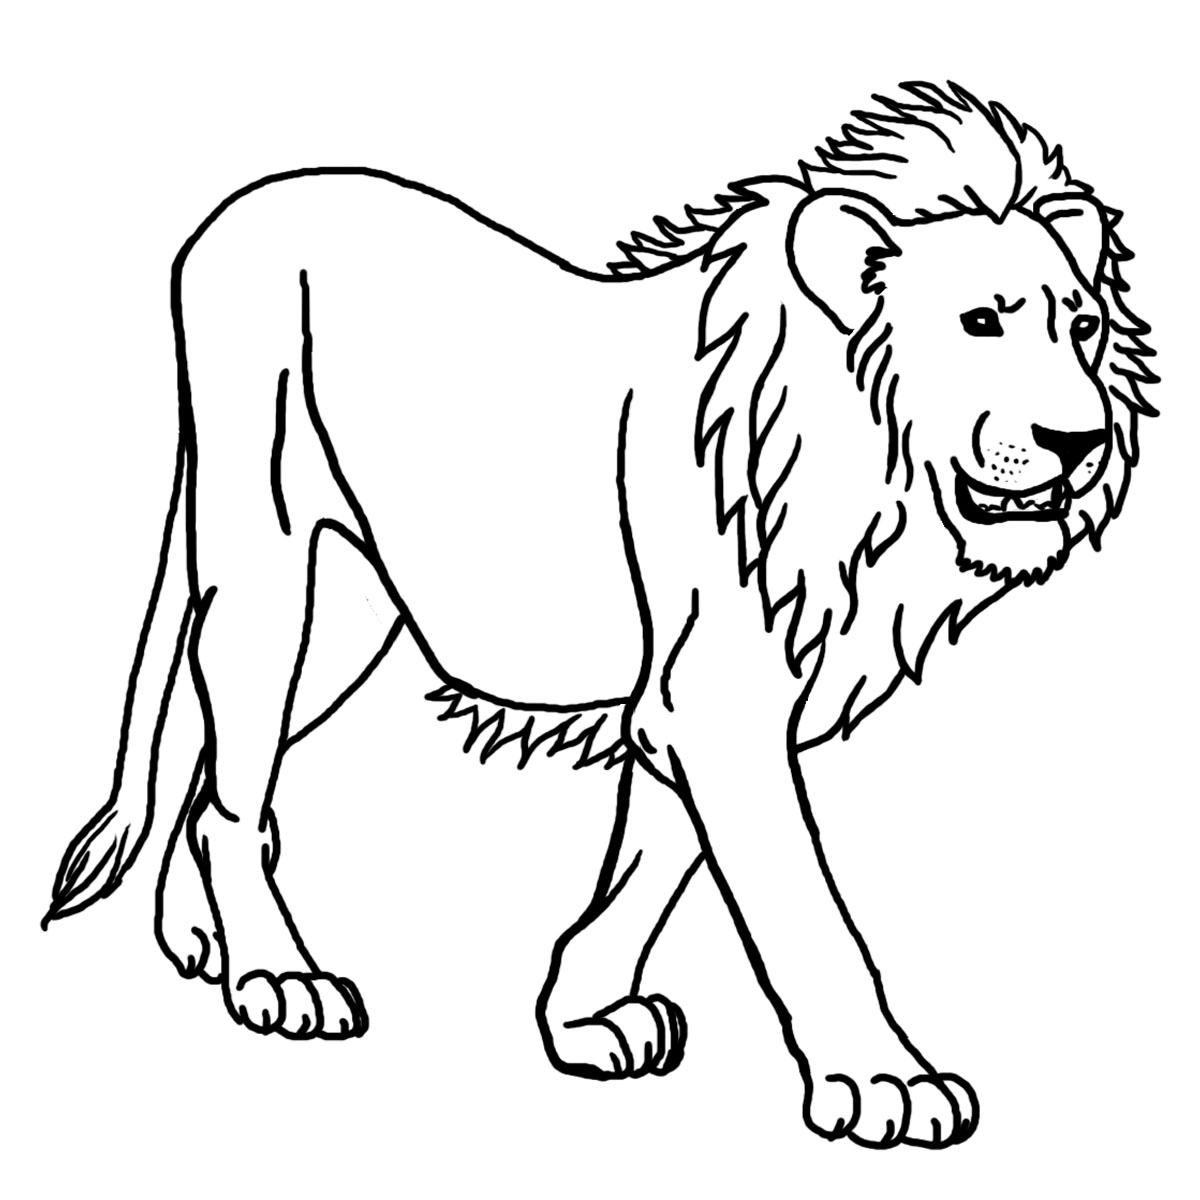 Lion black and white clipart 